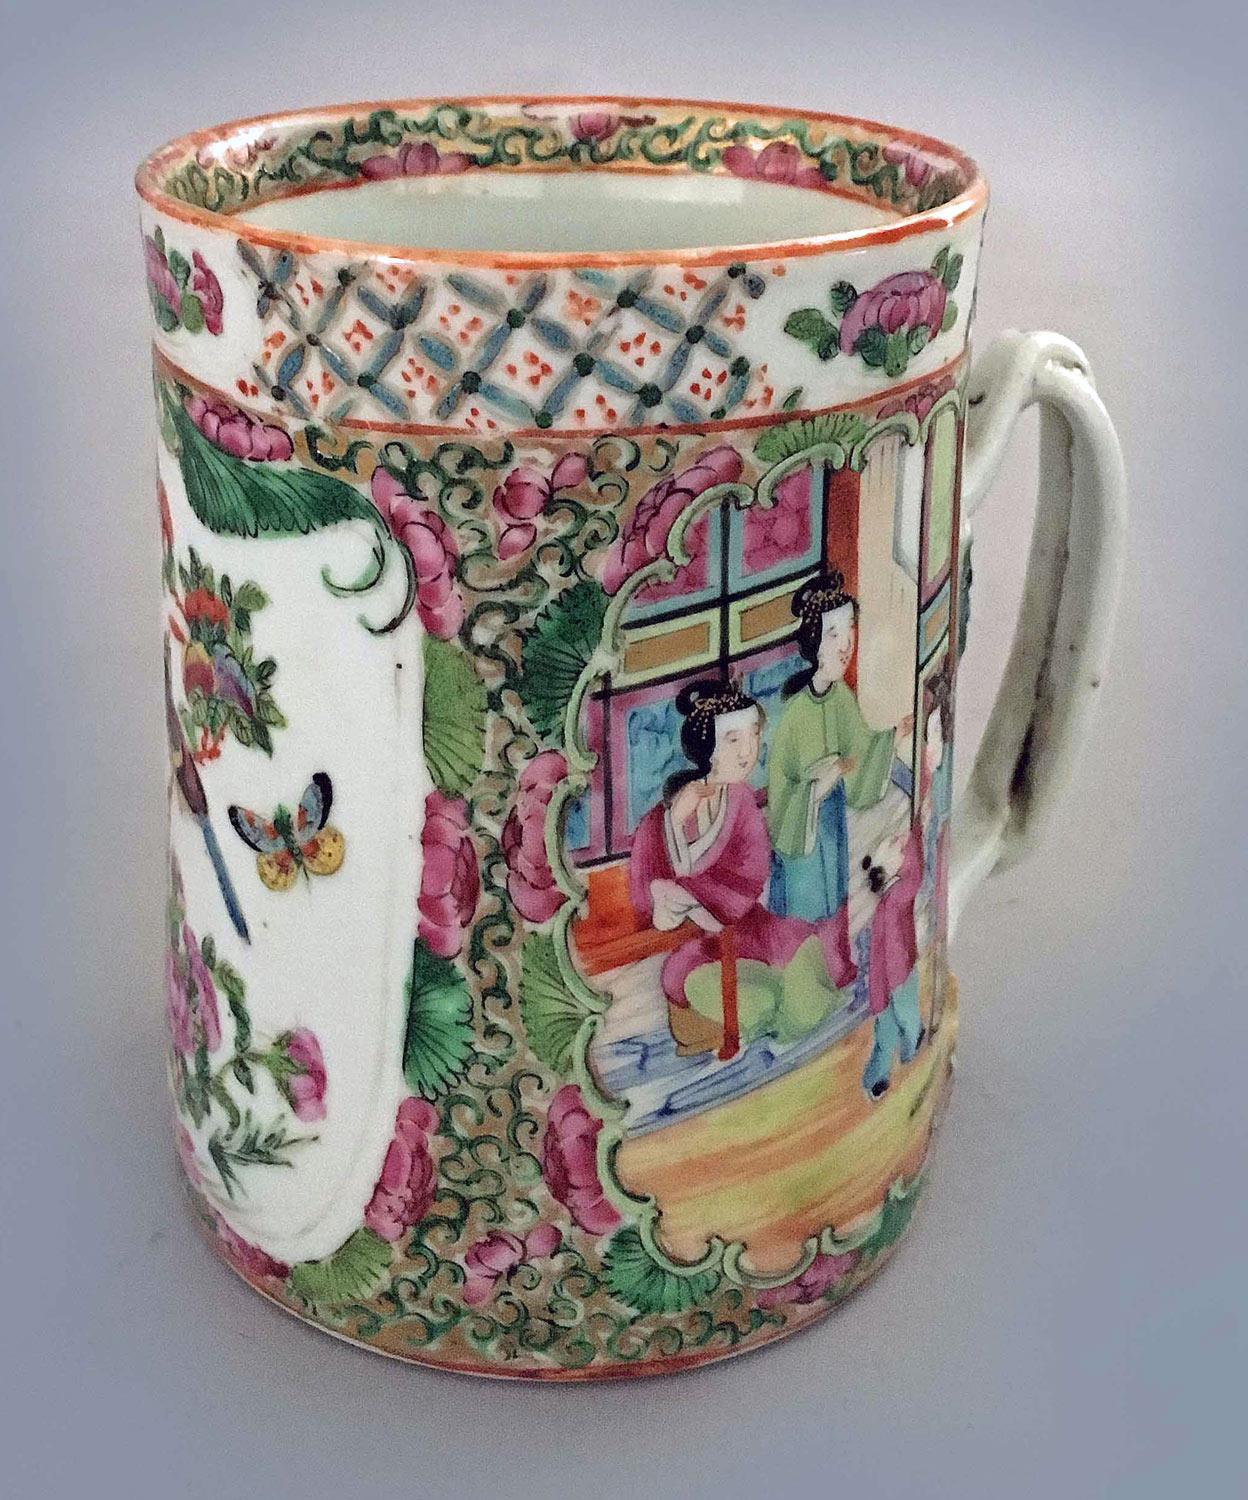 Antique Chinese Export famille rose medallion mug with a partially gilded double-twist handle, decorated with three panels, two of which are palace scenes of women with their children. The third panel encloses a bird perched on a branch with